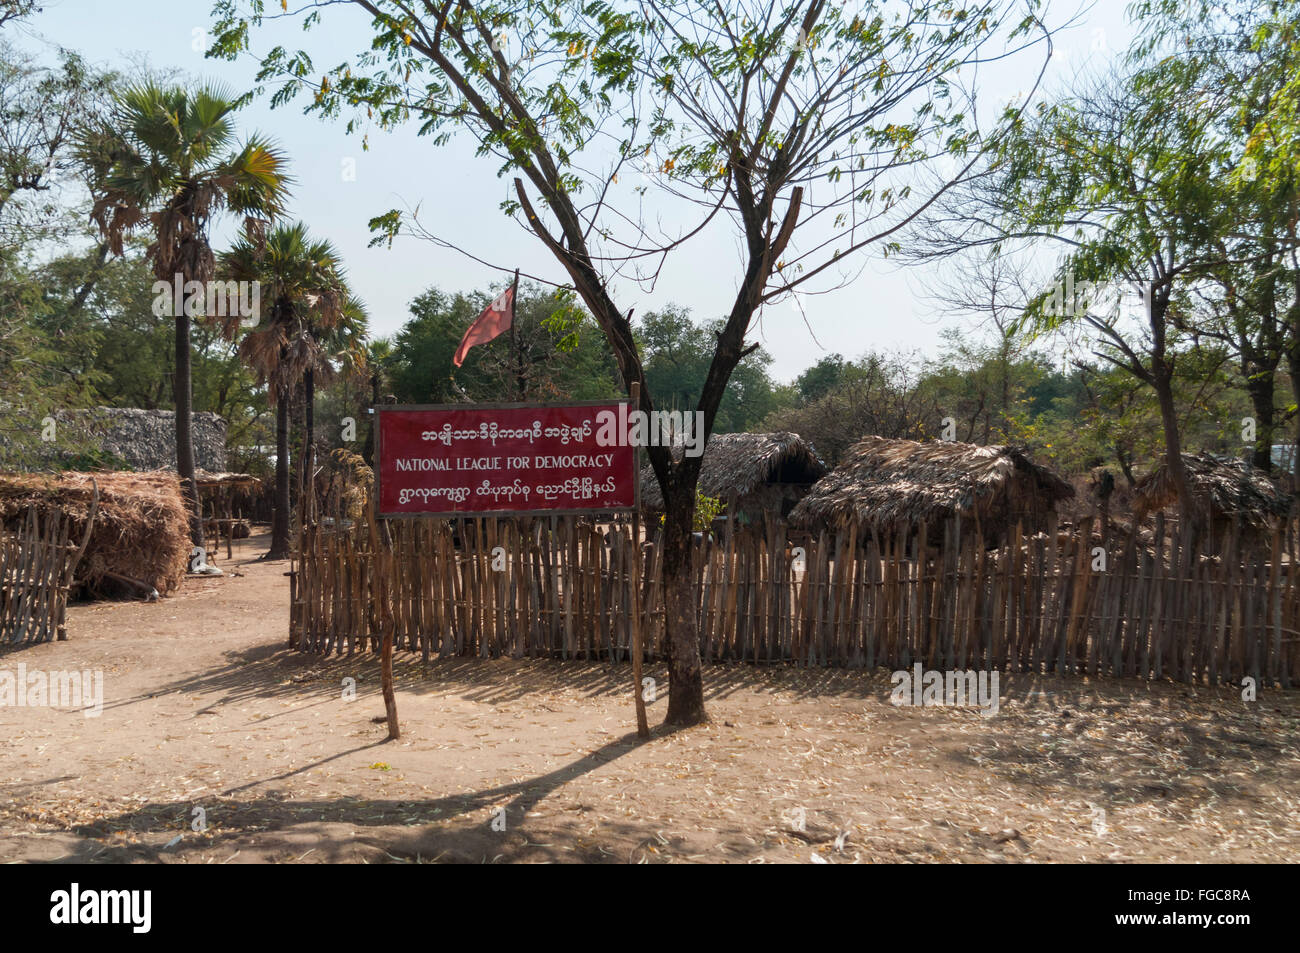 Assembly place of the NLD National League for Democracy party in a village in rural Myanmar (Burma). Stock Photo